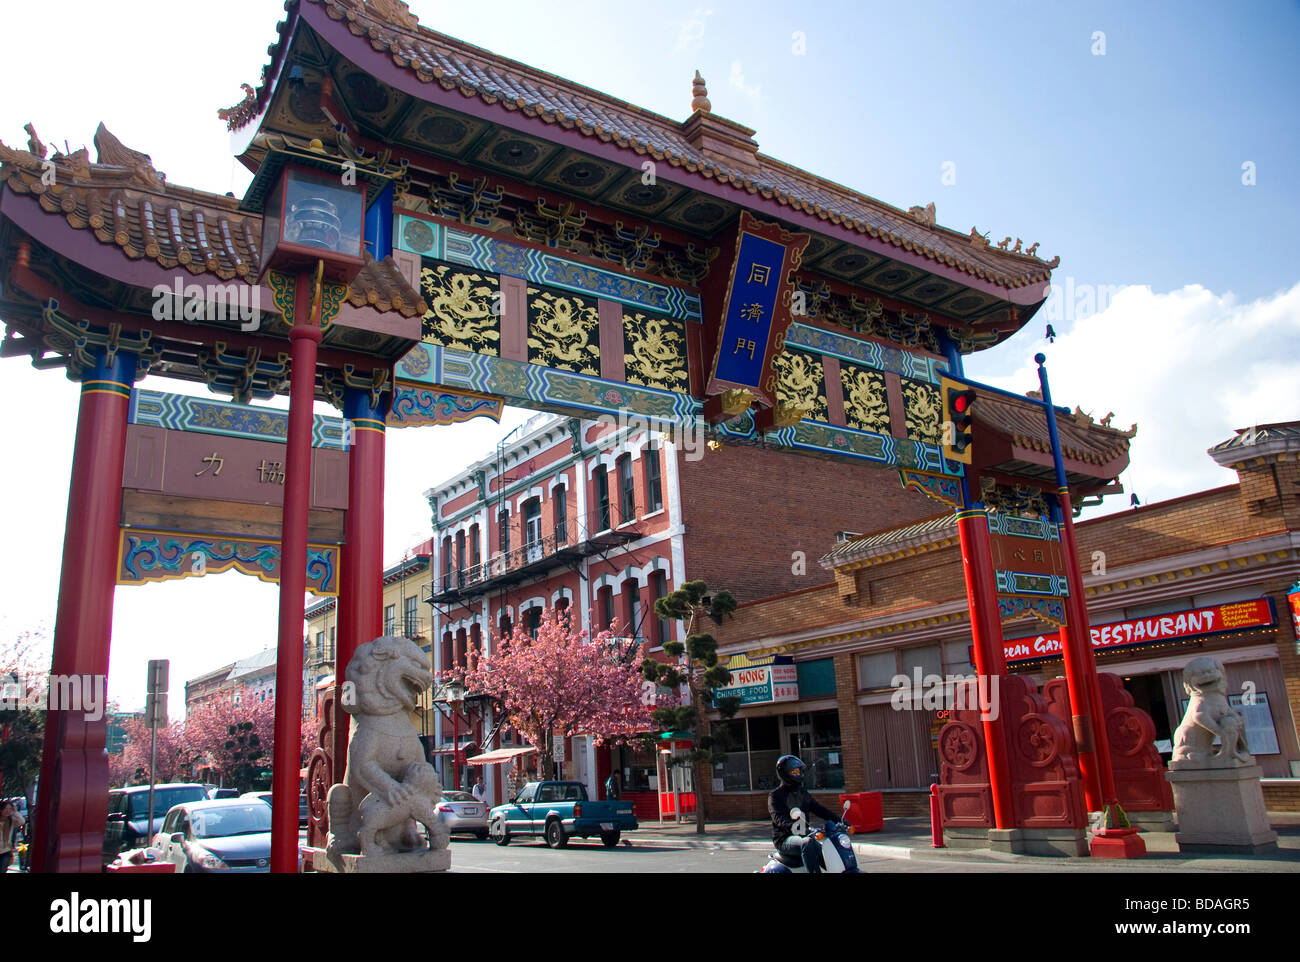 Ornate gate at the entrance to Chinatown - Victoria, BC, Canada Stock Photo